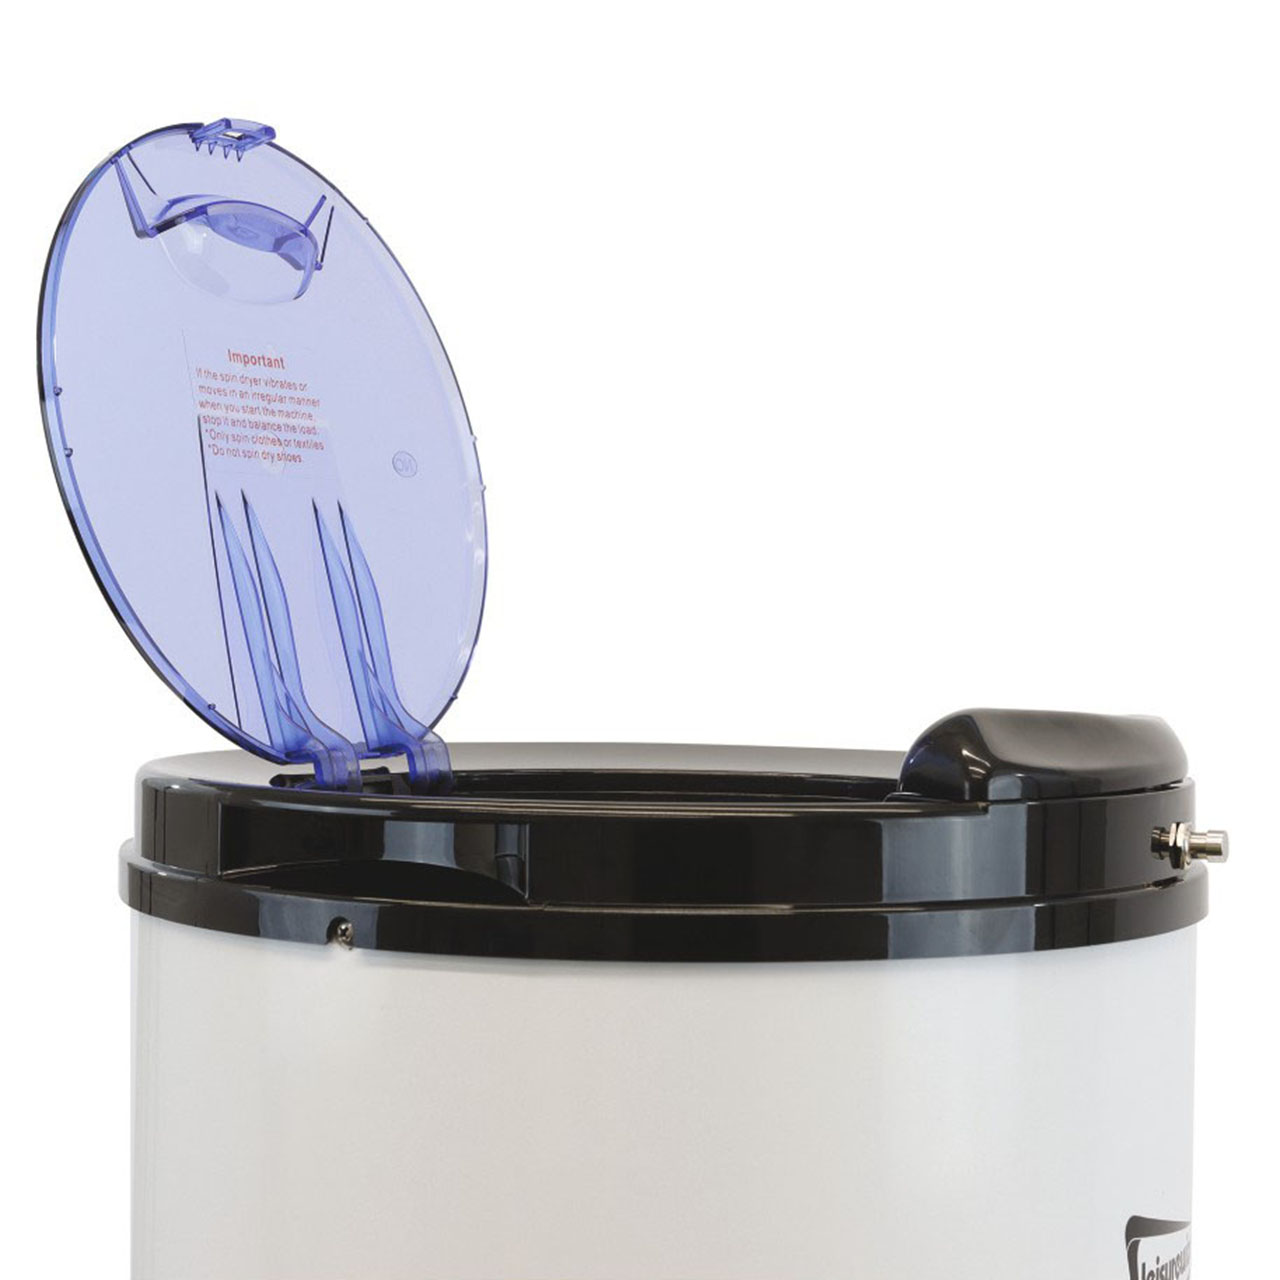 Portable Spin Dryer